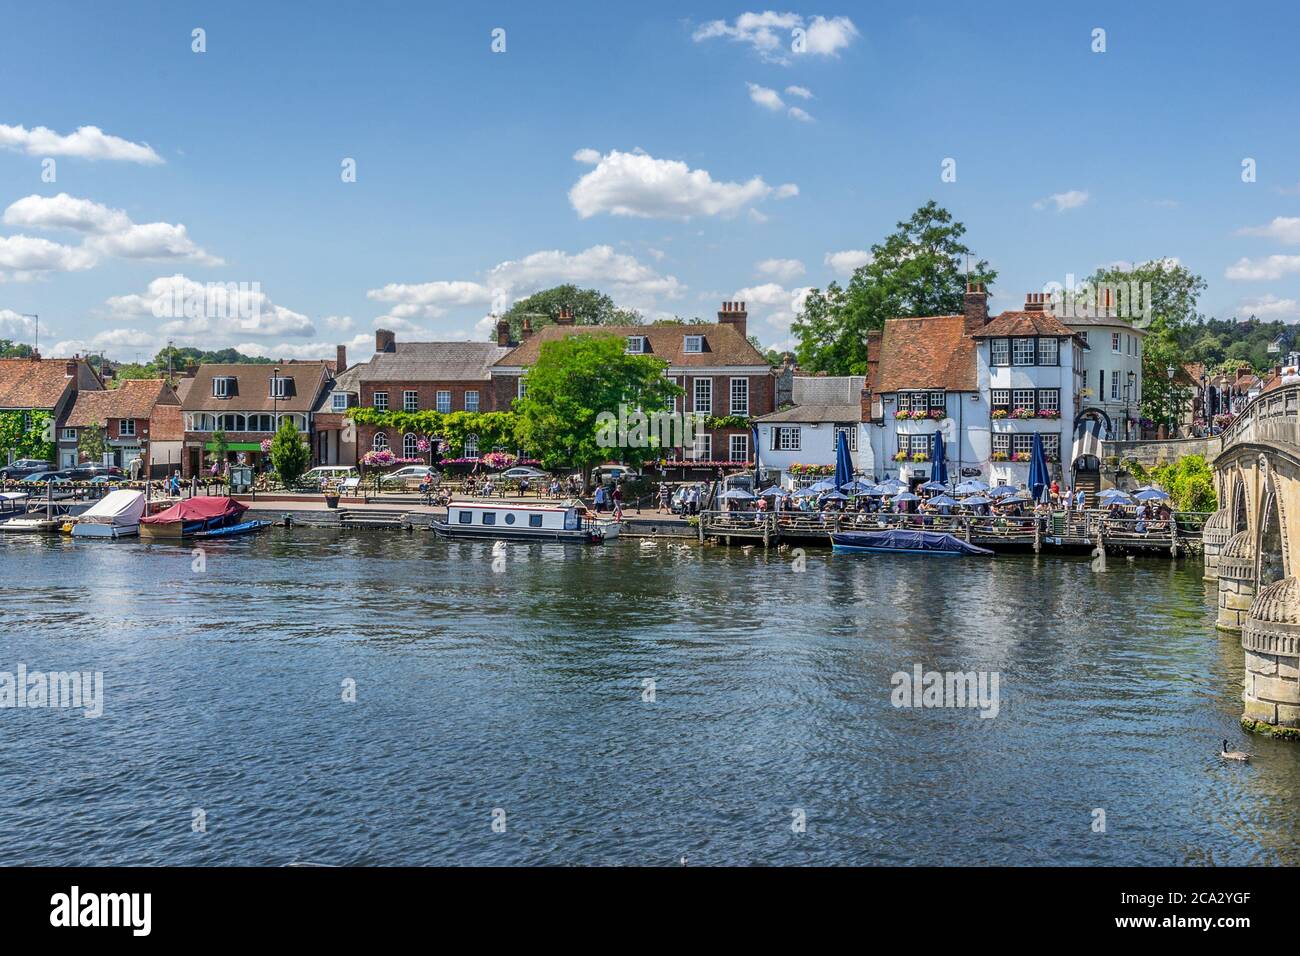 Looking across the River Thames at Henley on Thames in Oxfordshire England. Stock Photo